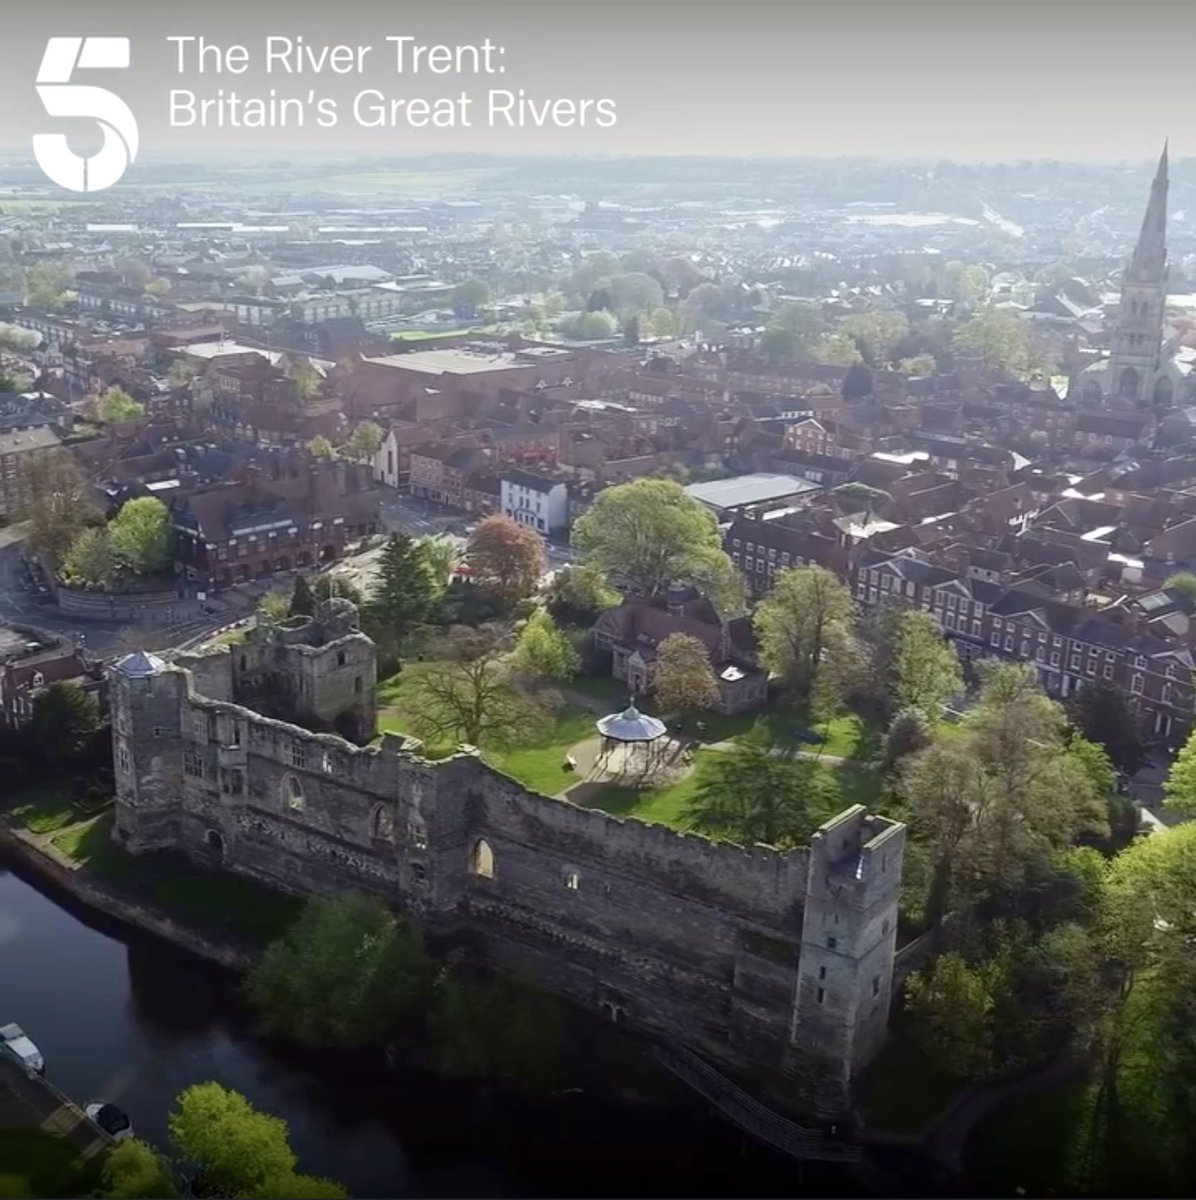 Always a proud feeling when we see our footage on the telly box especially on tonight’s ‘The River Trent: Britain's Great Rivers’ on Channel 5 🎥🎬

#thedroneman  #kurniaaerialphotography #DroneProduction #AerialProduction #DroneVideography #AerialFilming #DroneFilming